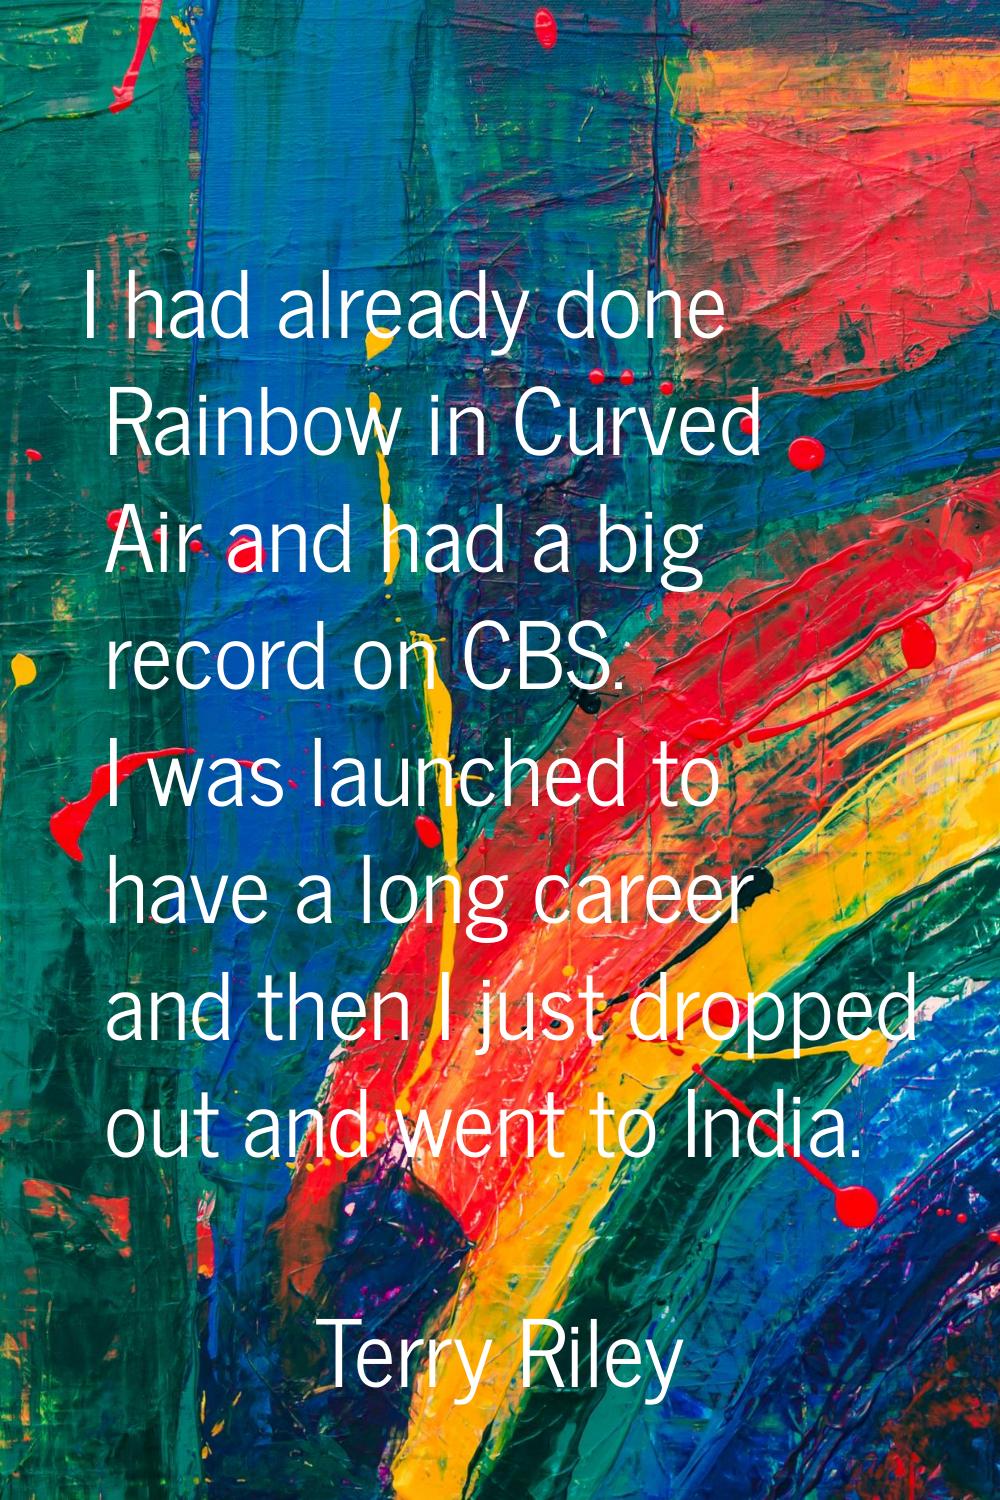 I had already done Rainbow in Curved Air and had a big record on CBS. I was launched to have a long